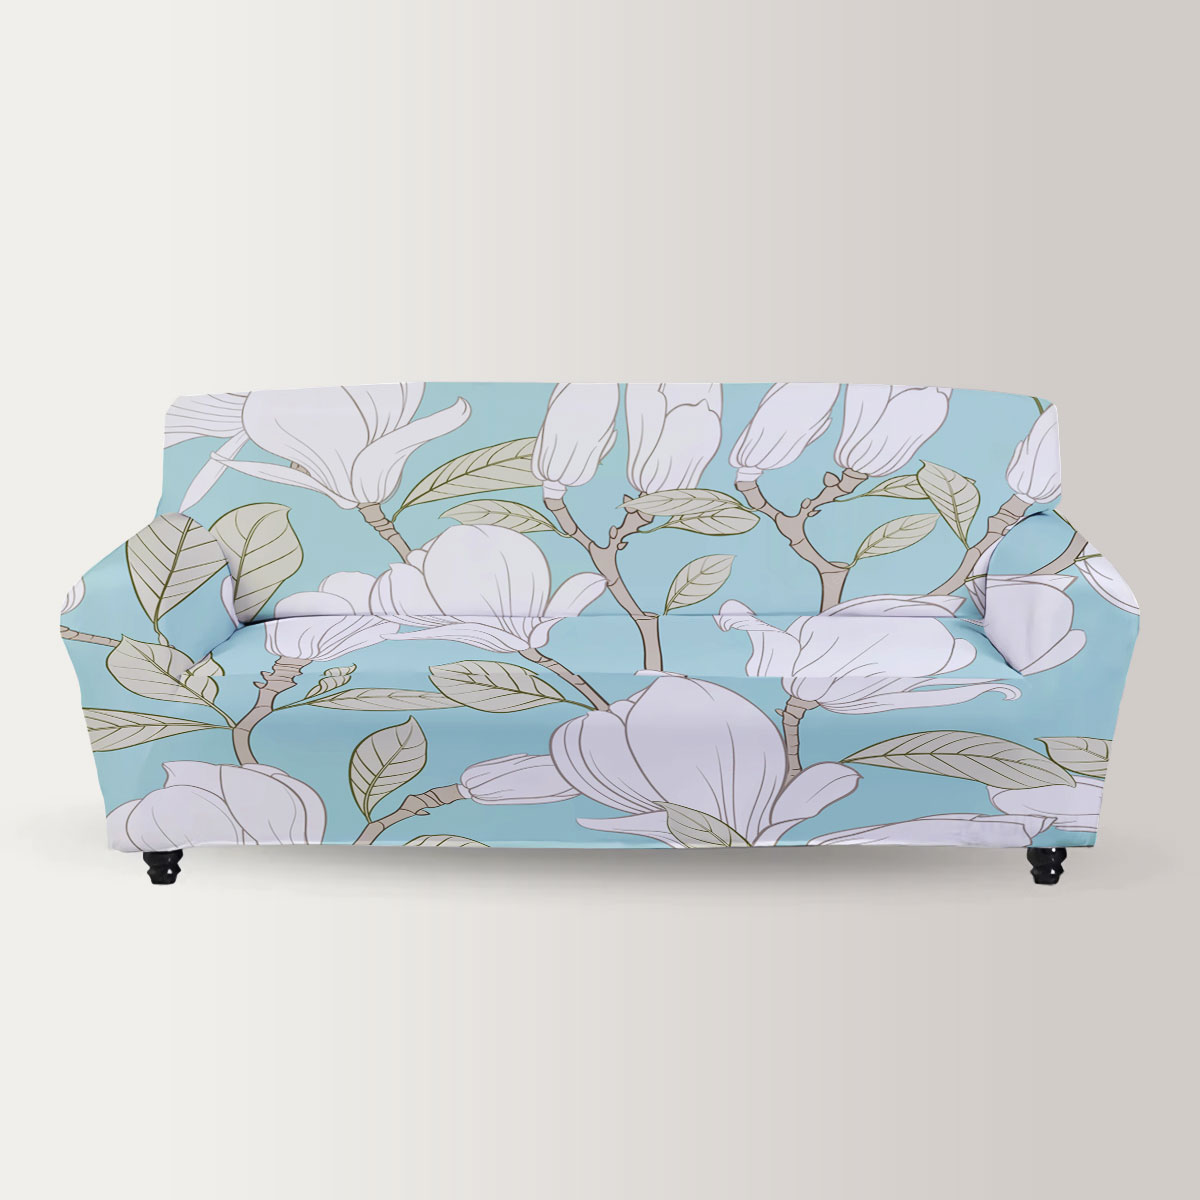 Magnolia Flower On Blue Background Sofa Cover